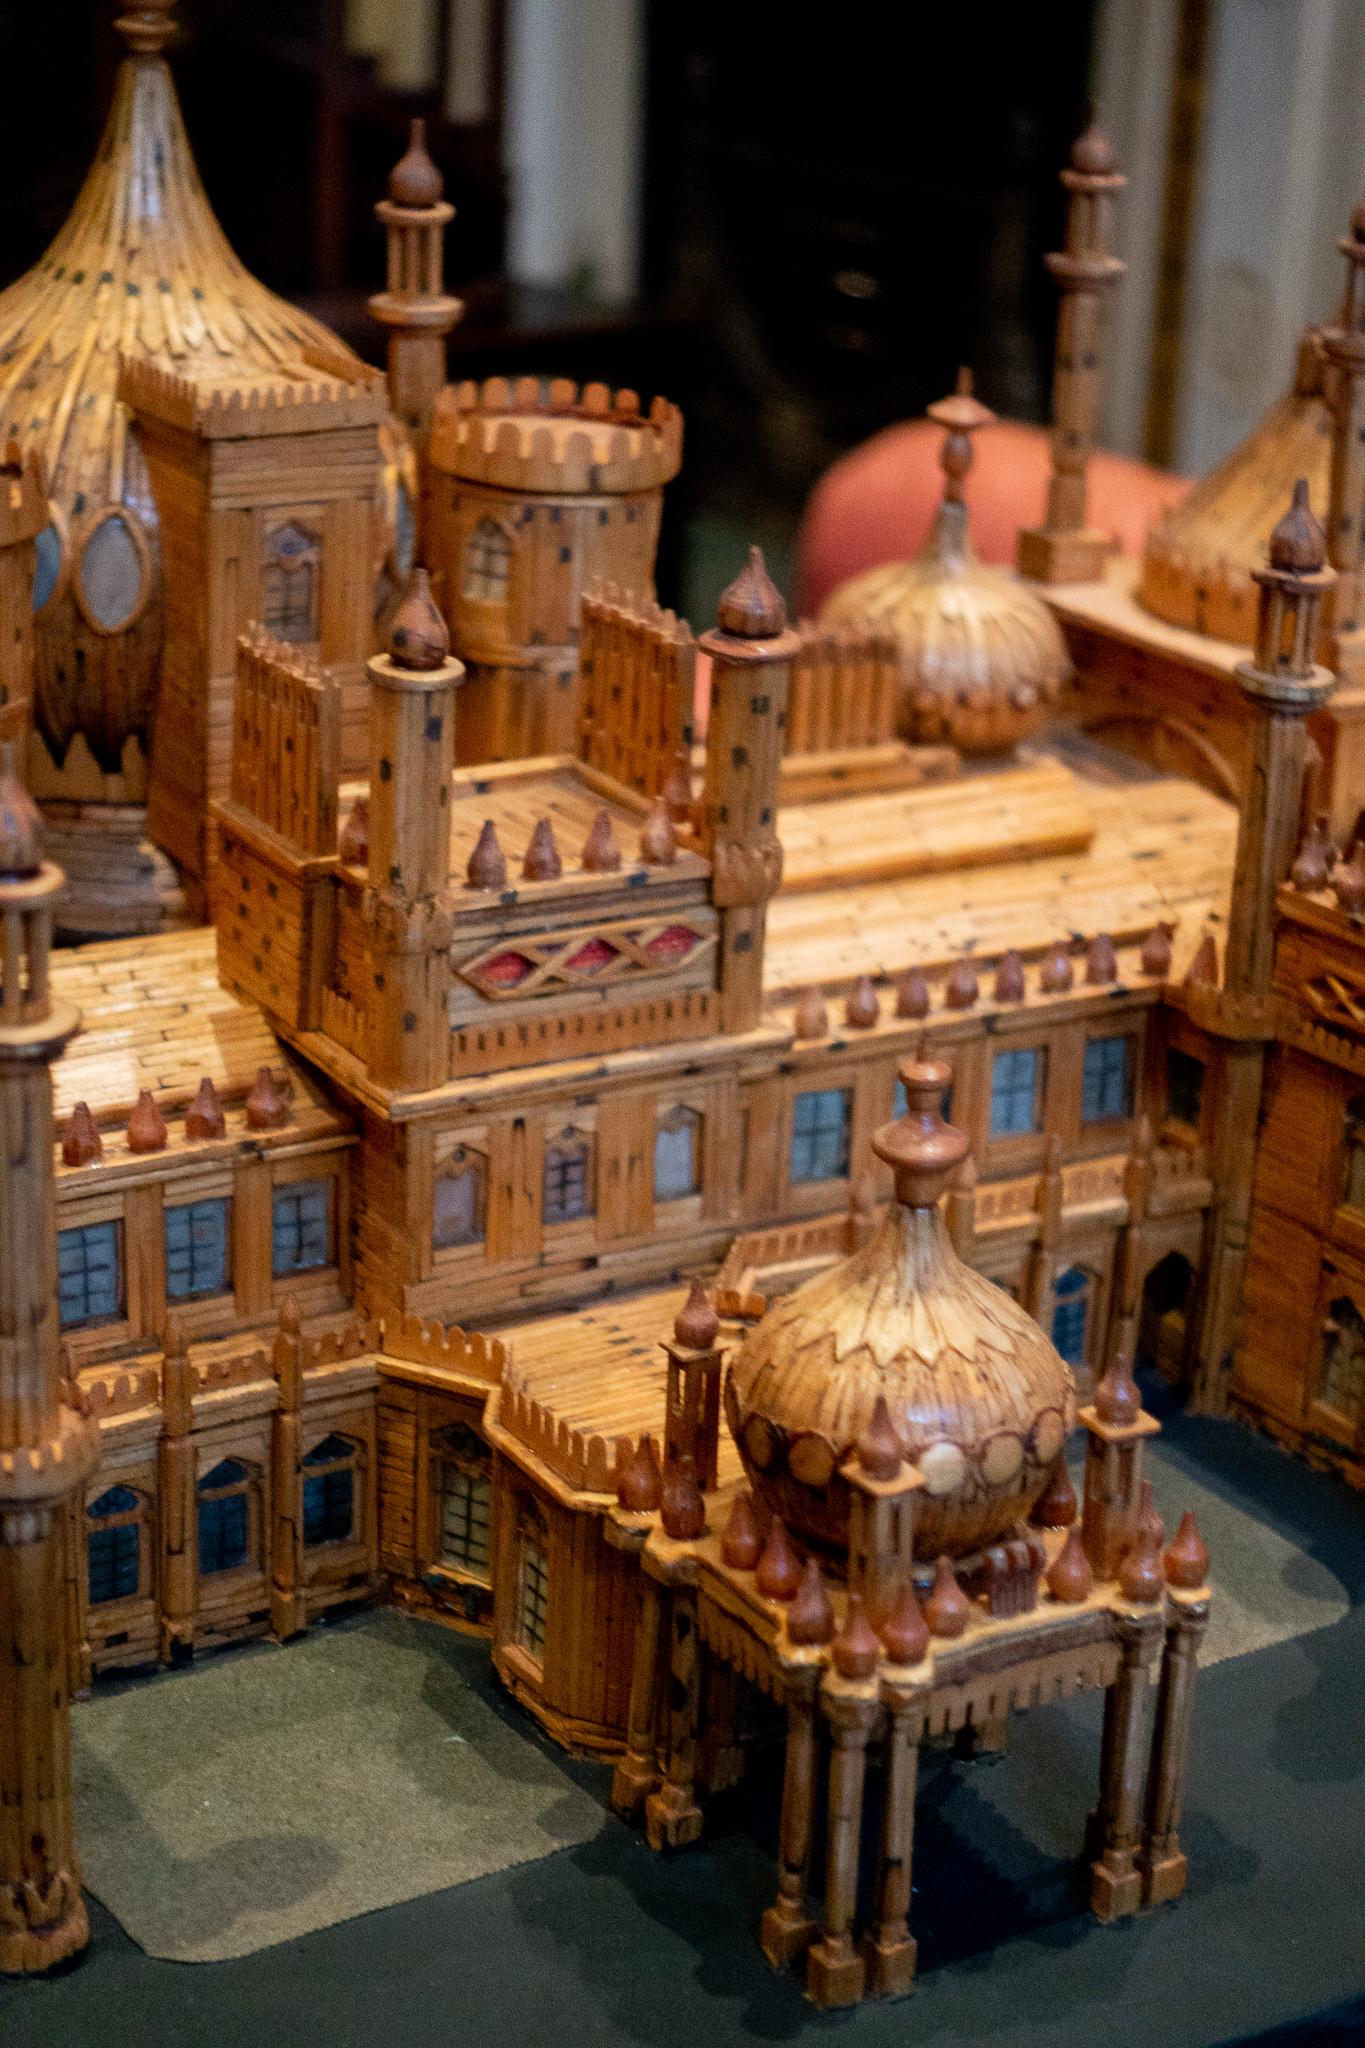 English Royal Brighton Pavilion Matchstick Architectural Model by Bernard Martell For Sale